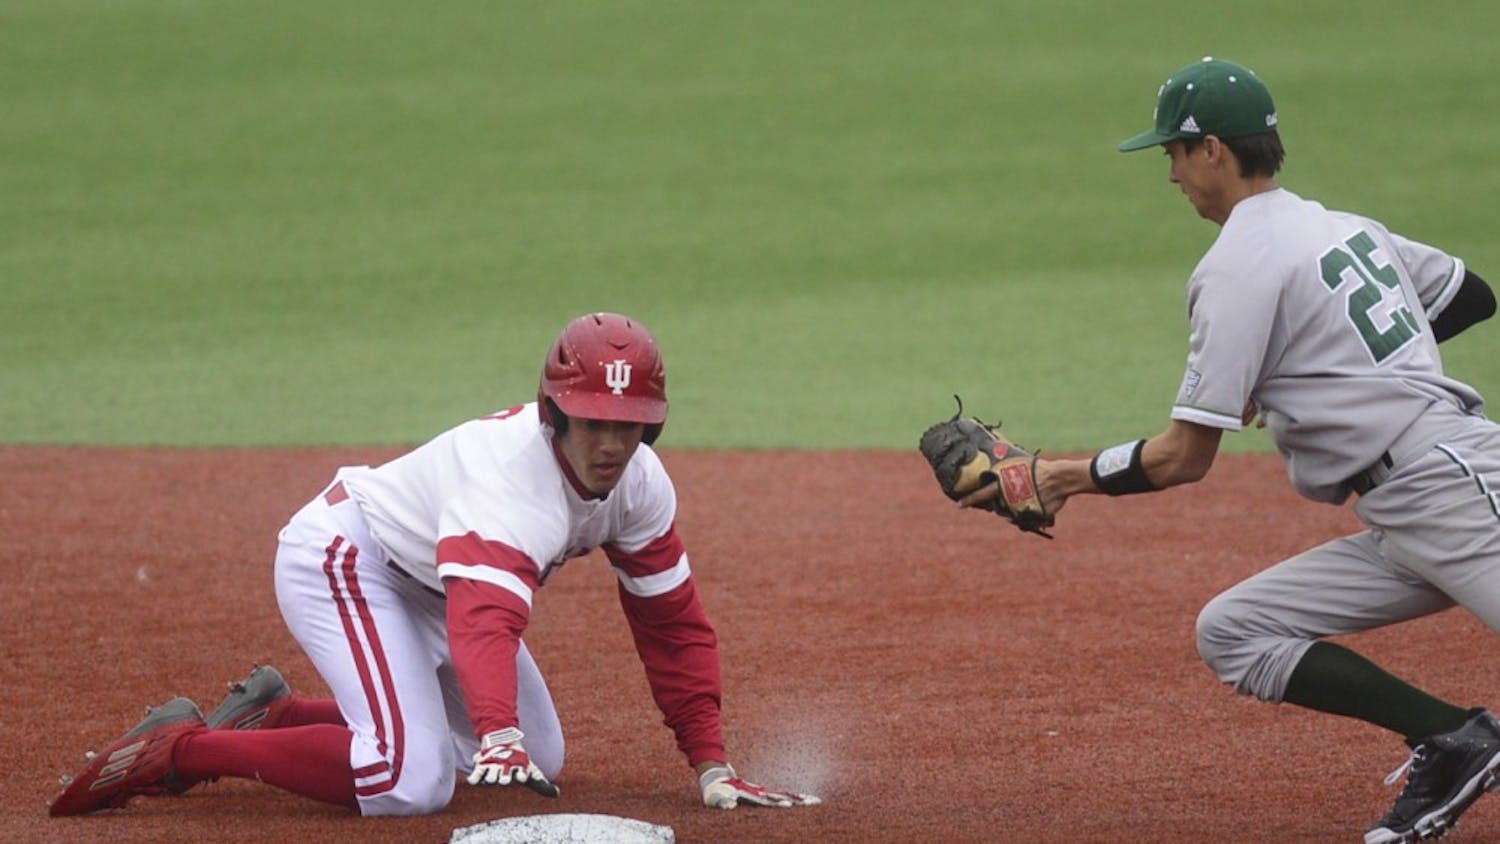 Freshman Isaiah Pasteur reaches for second base to avoid a tag during IU's home opener against Eastern Michigan on Tuesday at Bart Kaufman Field.